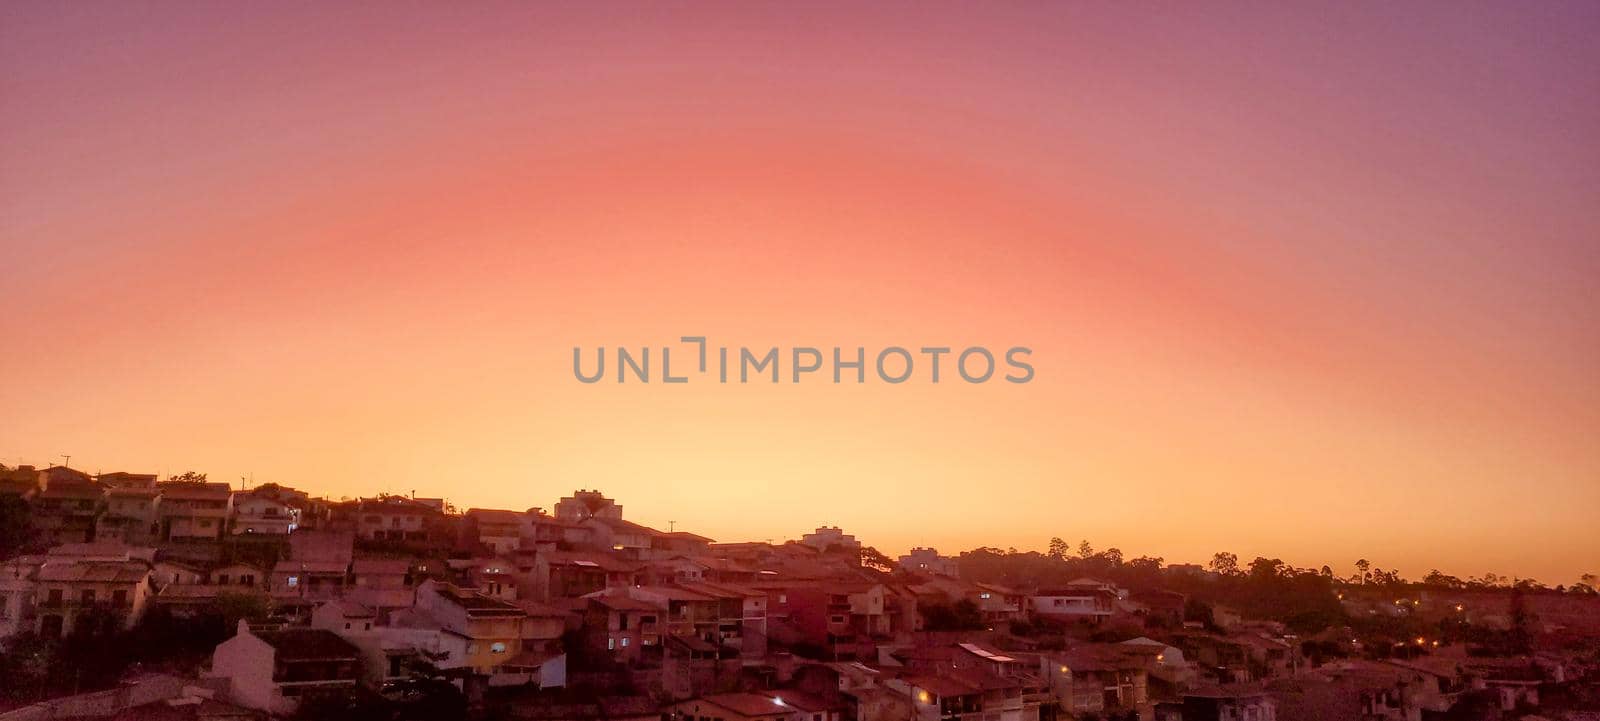 colorful late afternoon sunset in the countryside of Brazil inserting the day